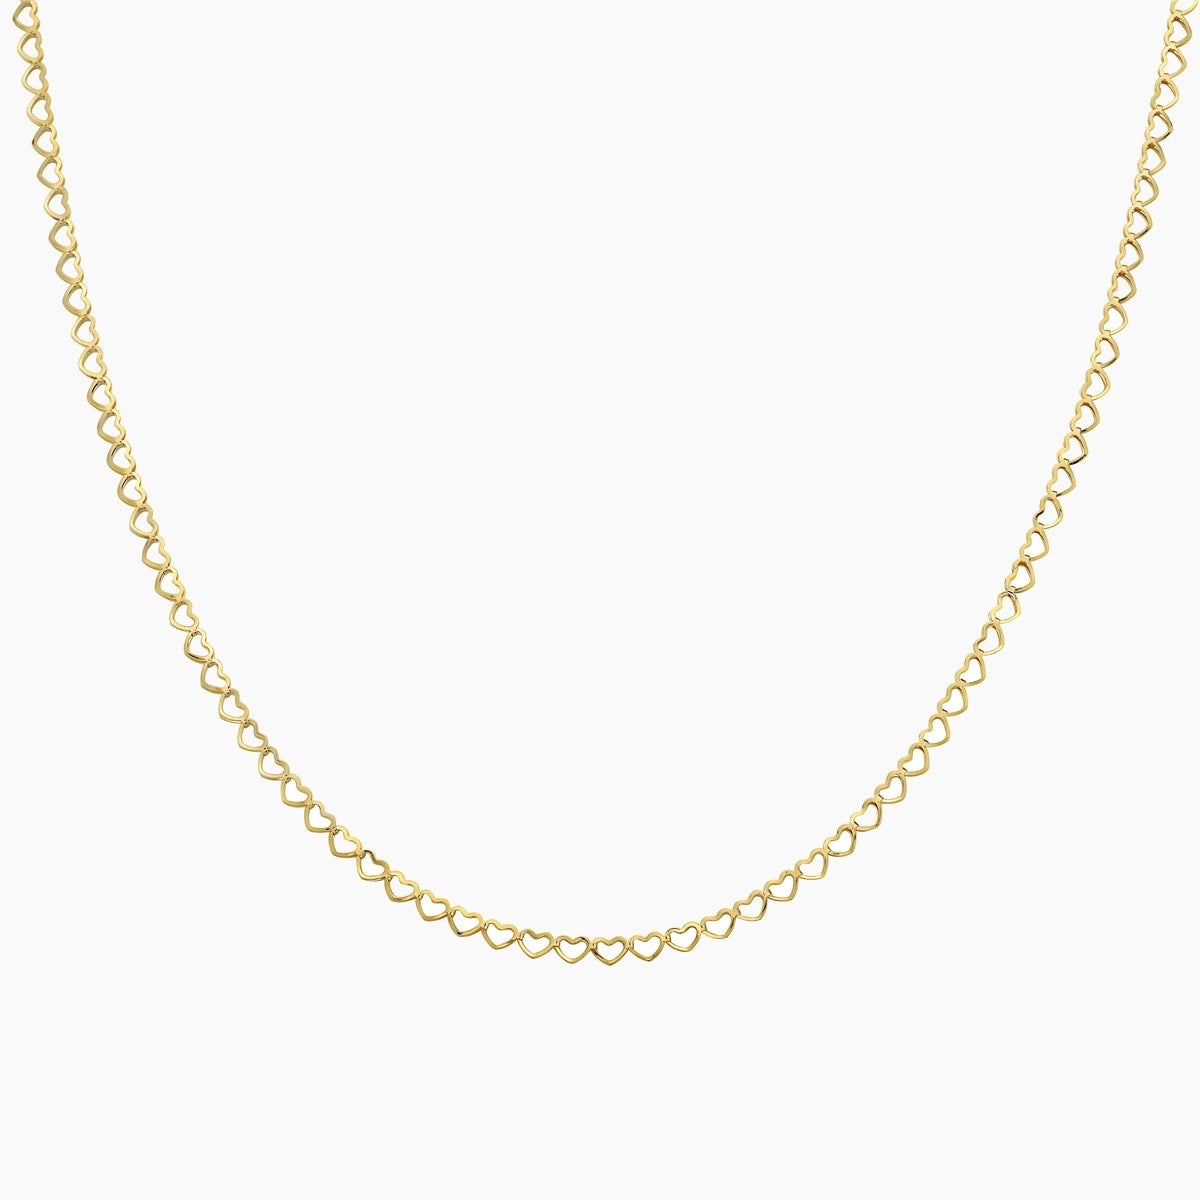 14K Gold 2.5MM Open Heart Link Chain Necklace